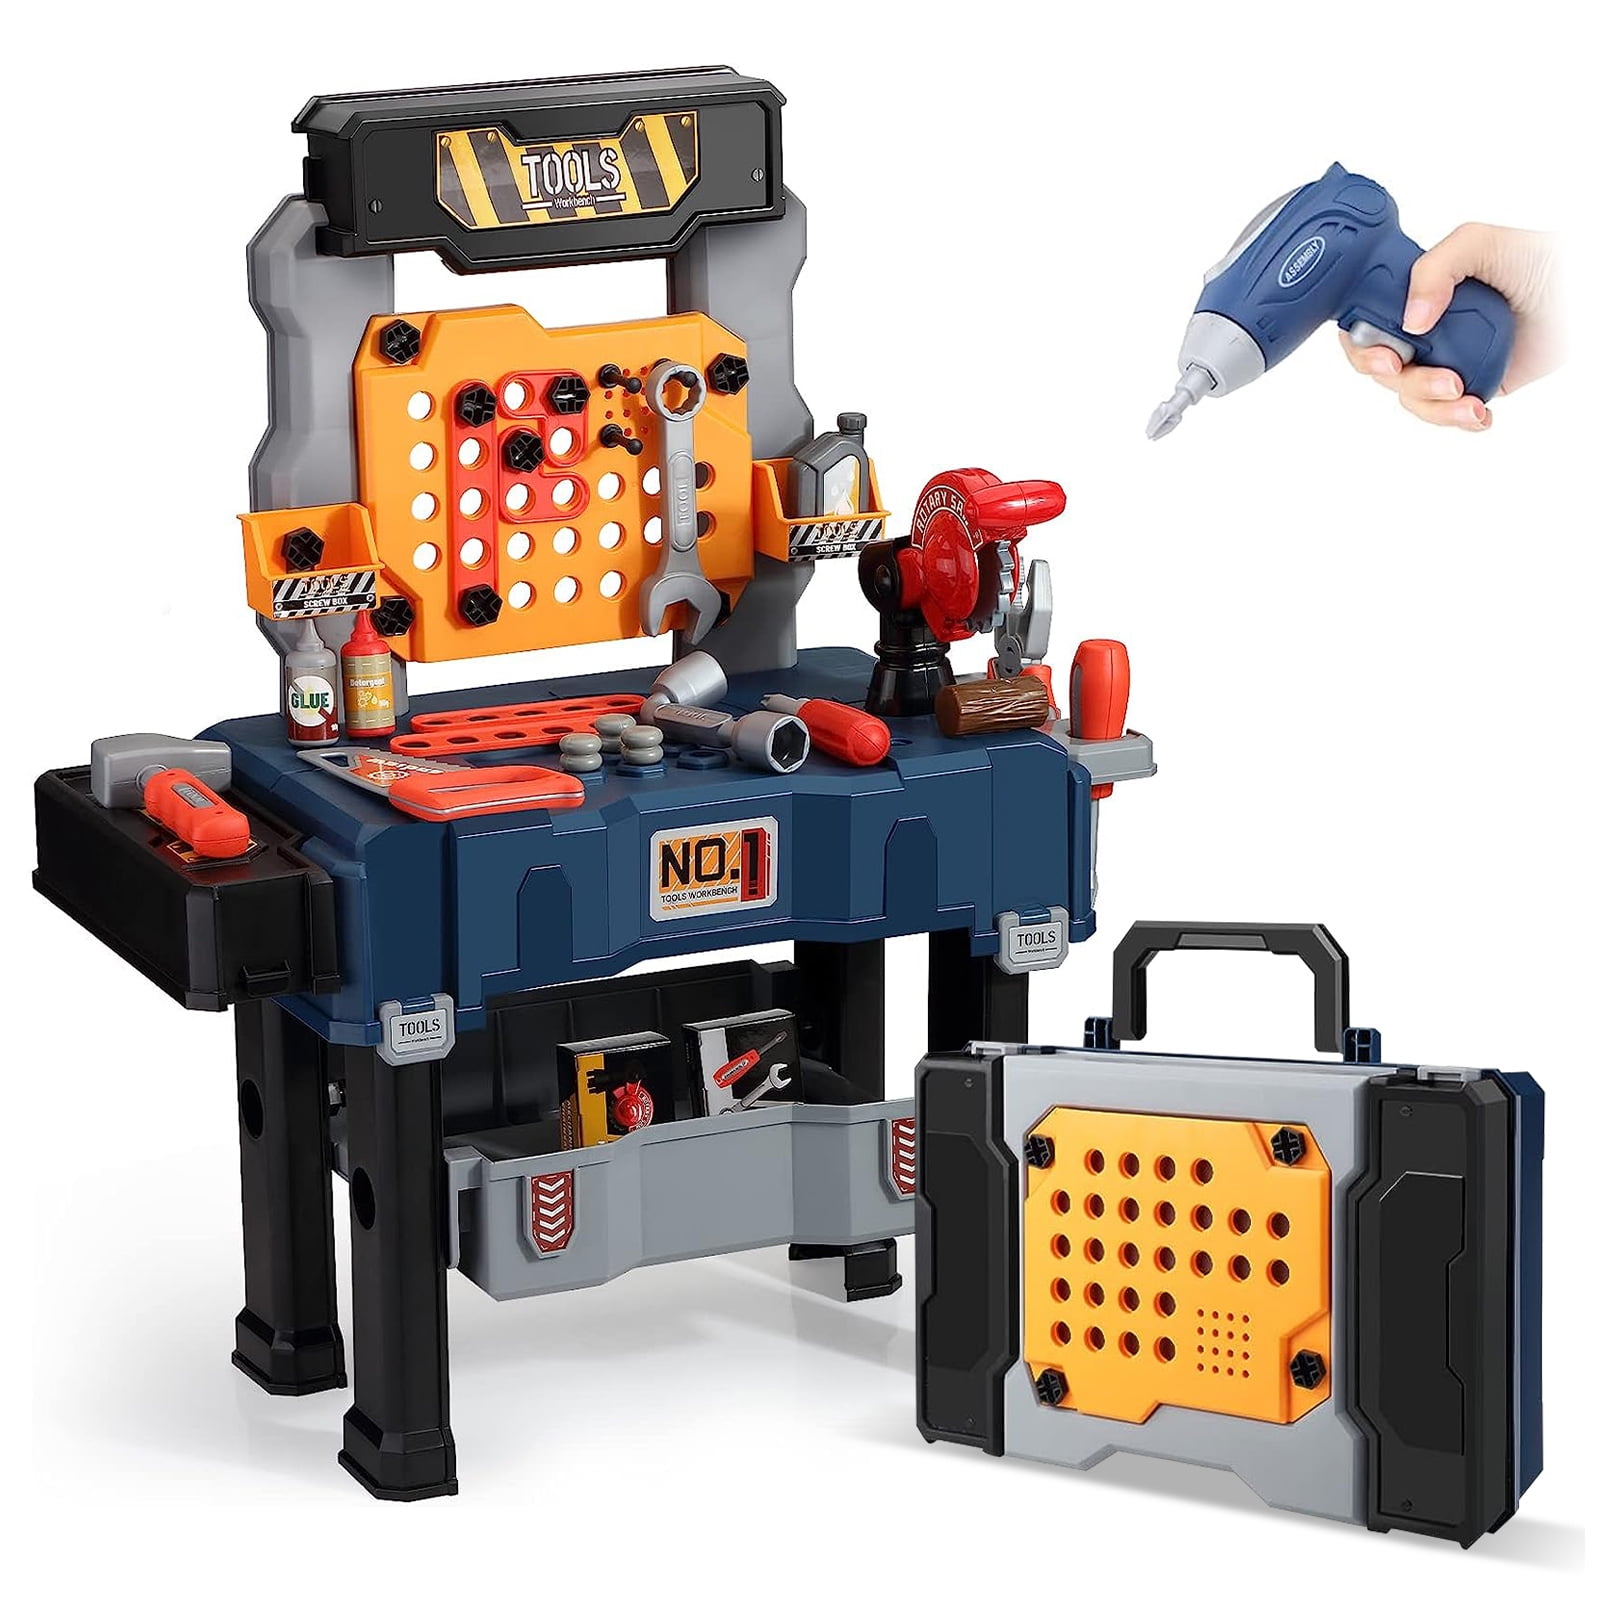  Black + Decker Junior Kids Tool Set - Mega Tool Set with  42Piece Tools & Accessories! Role Play Tools for Toddlers Boys & Girls Ages  3 Years Old & Above, Includes